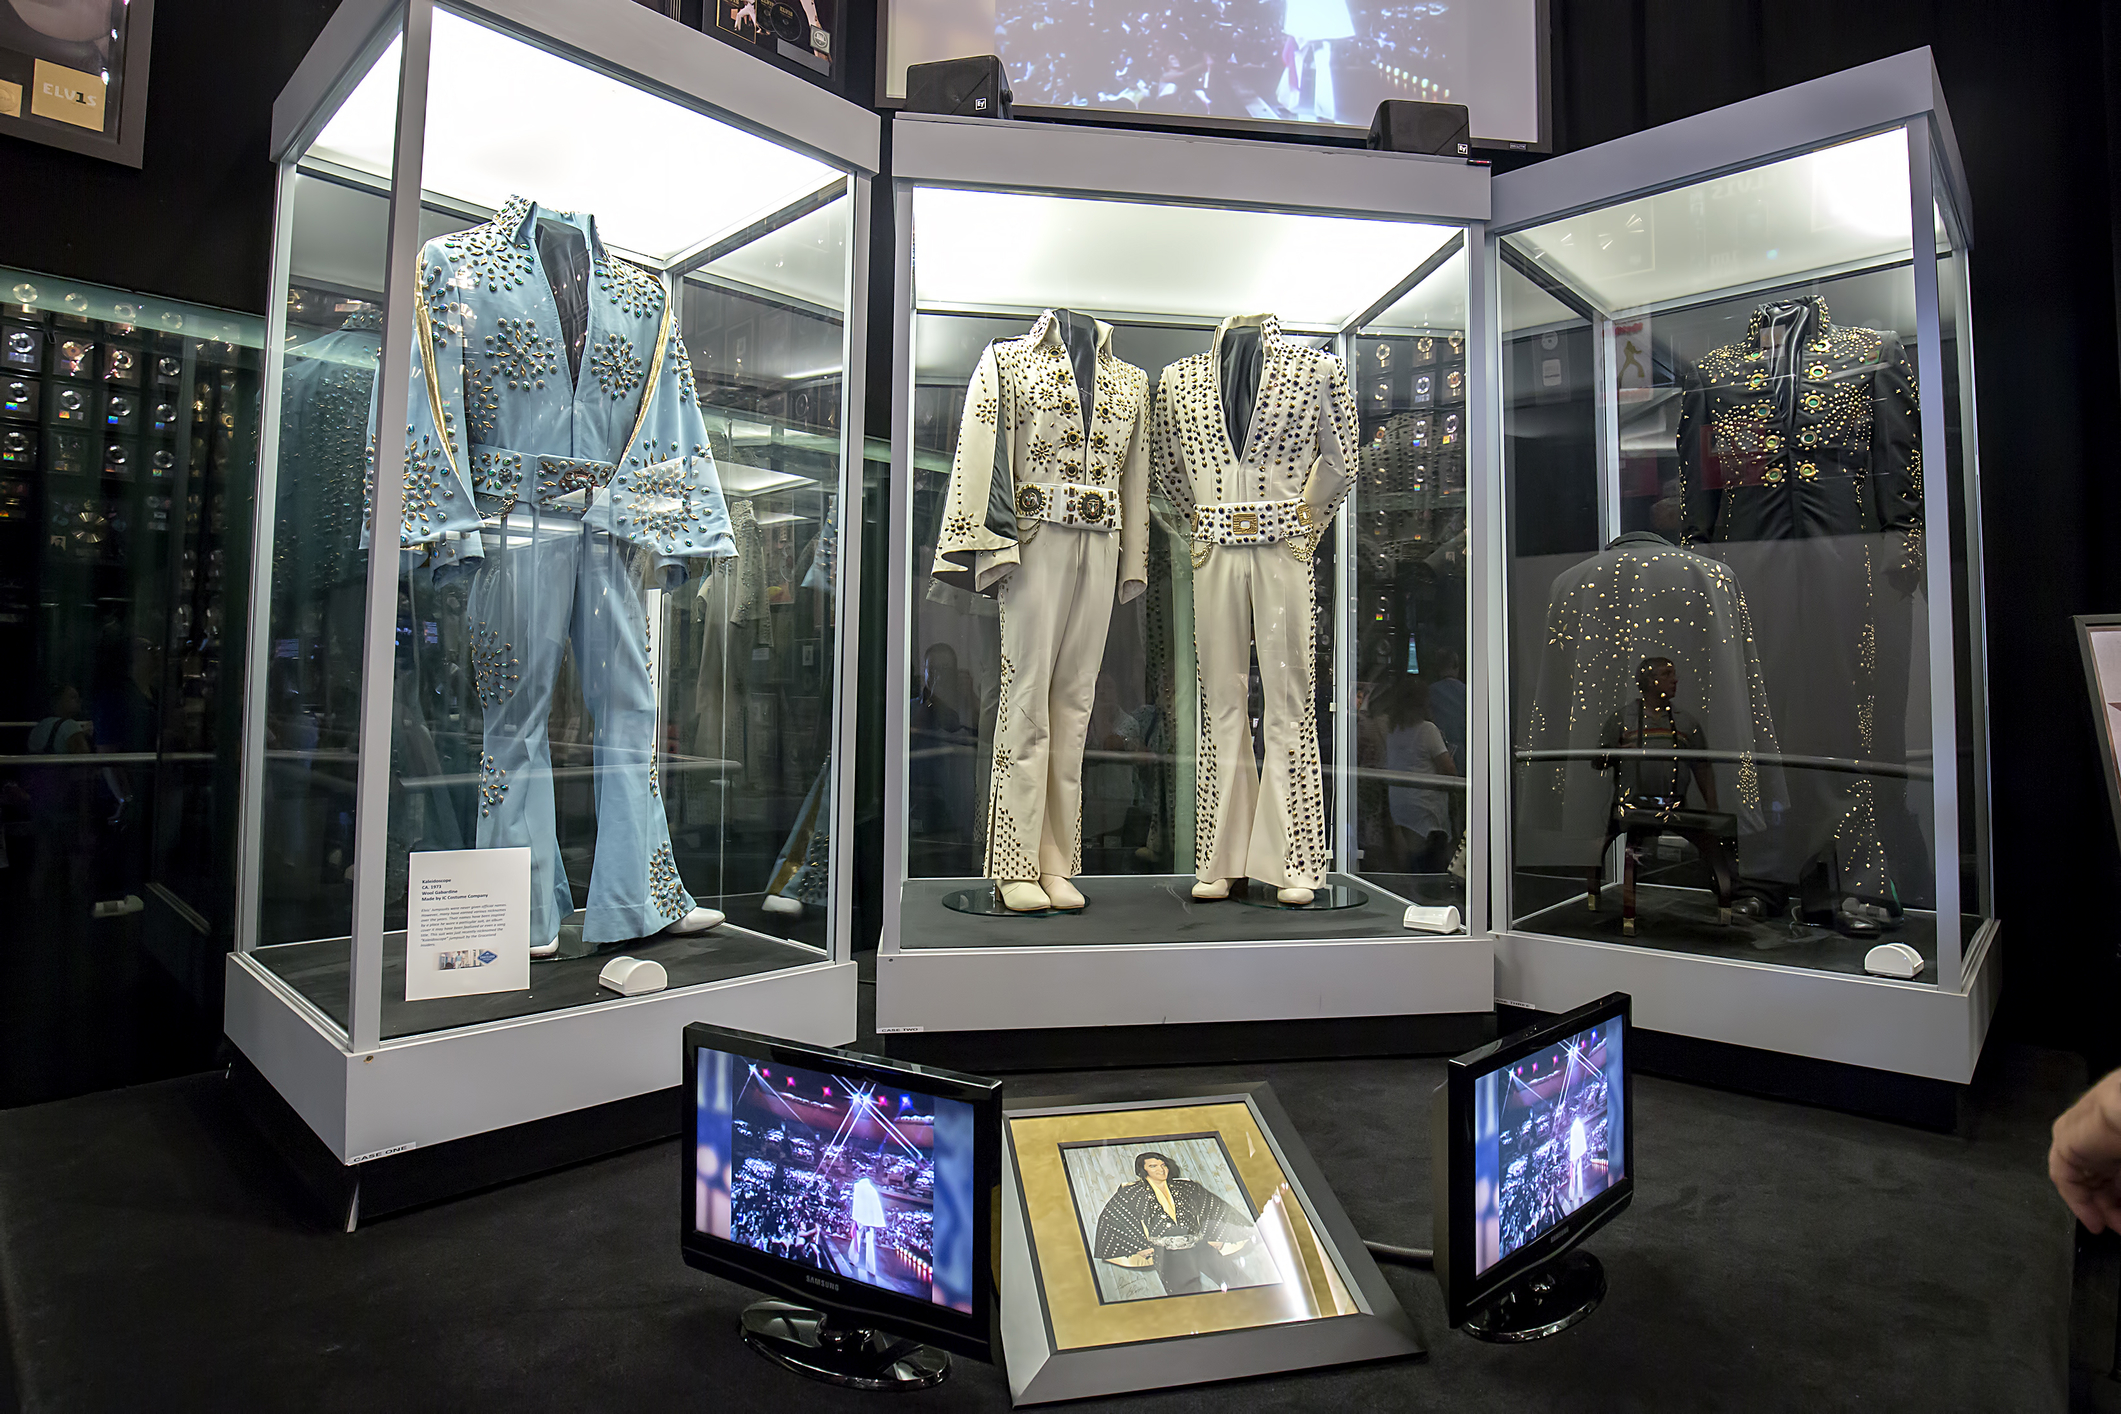 Elvis's costumes at Graceland, Memphis, Tennessee